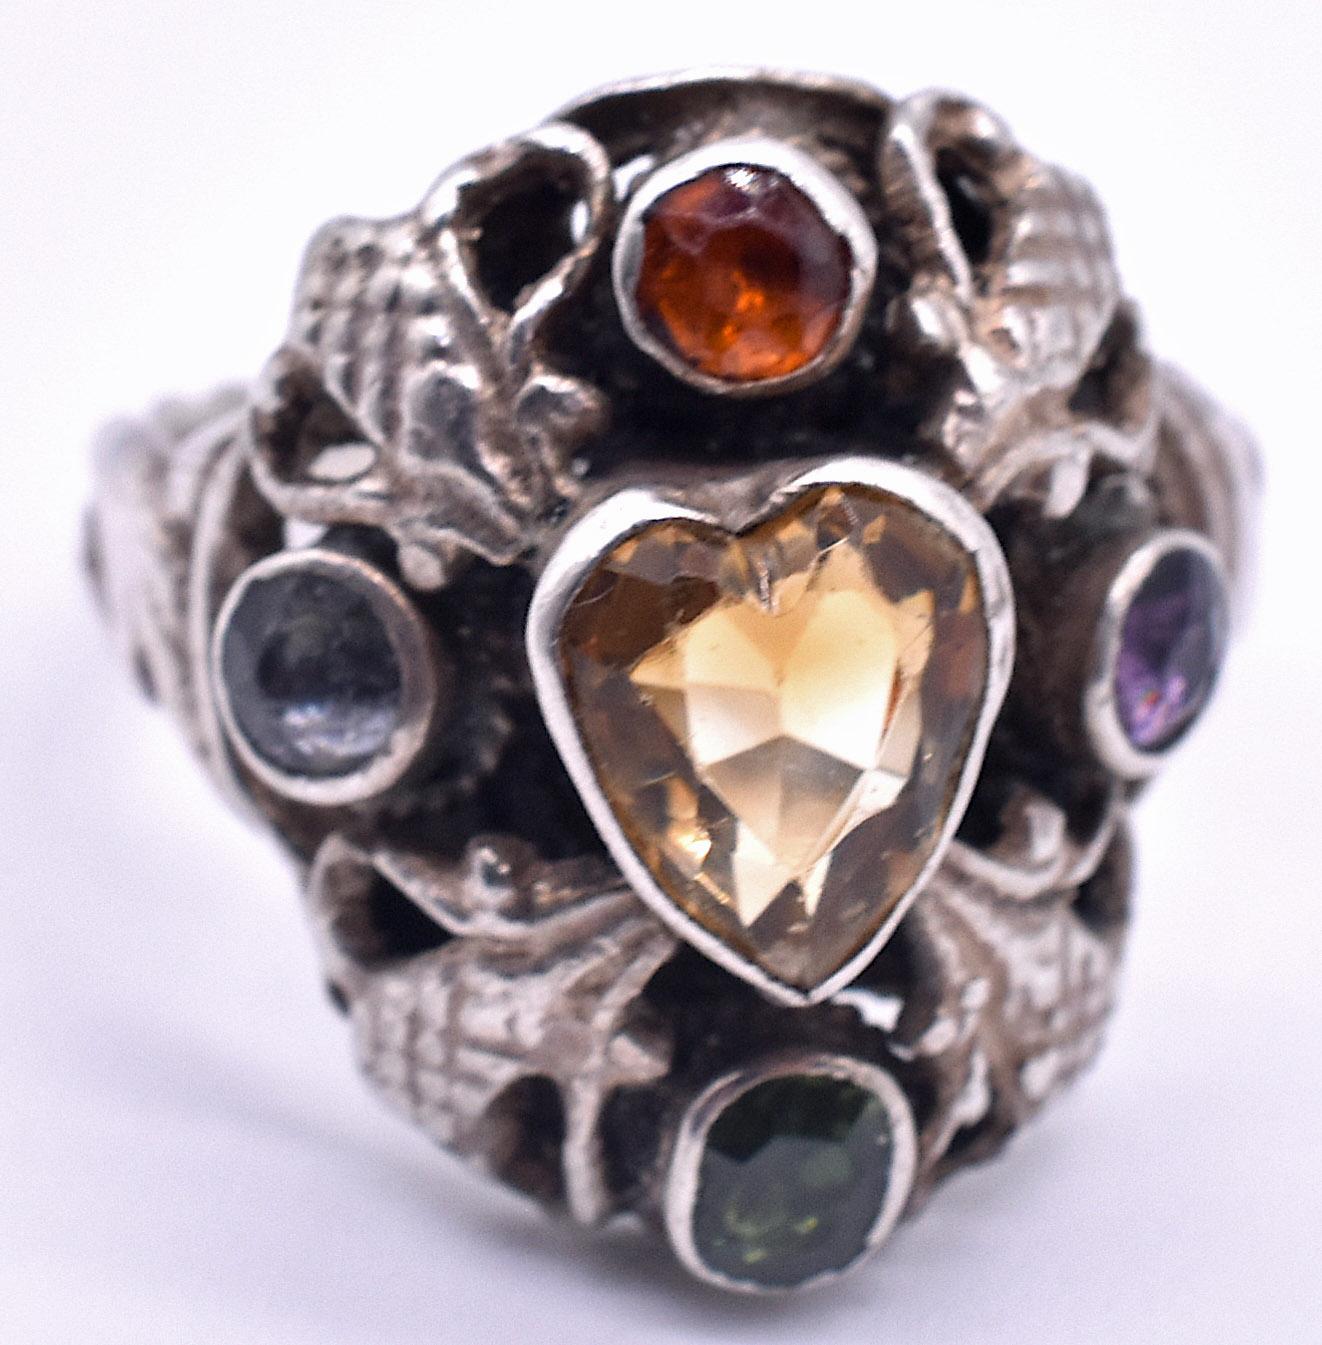 Unusual sterling silver Victorian ring with a diamond on one side and an amethyst on the other, and a cushion cut tourmaline, garnet, and citrine heart in the center. The ring is US size 6 1/4.